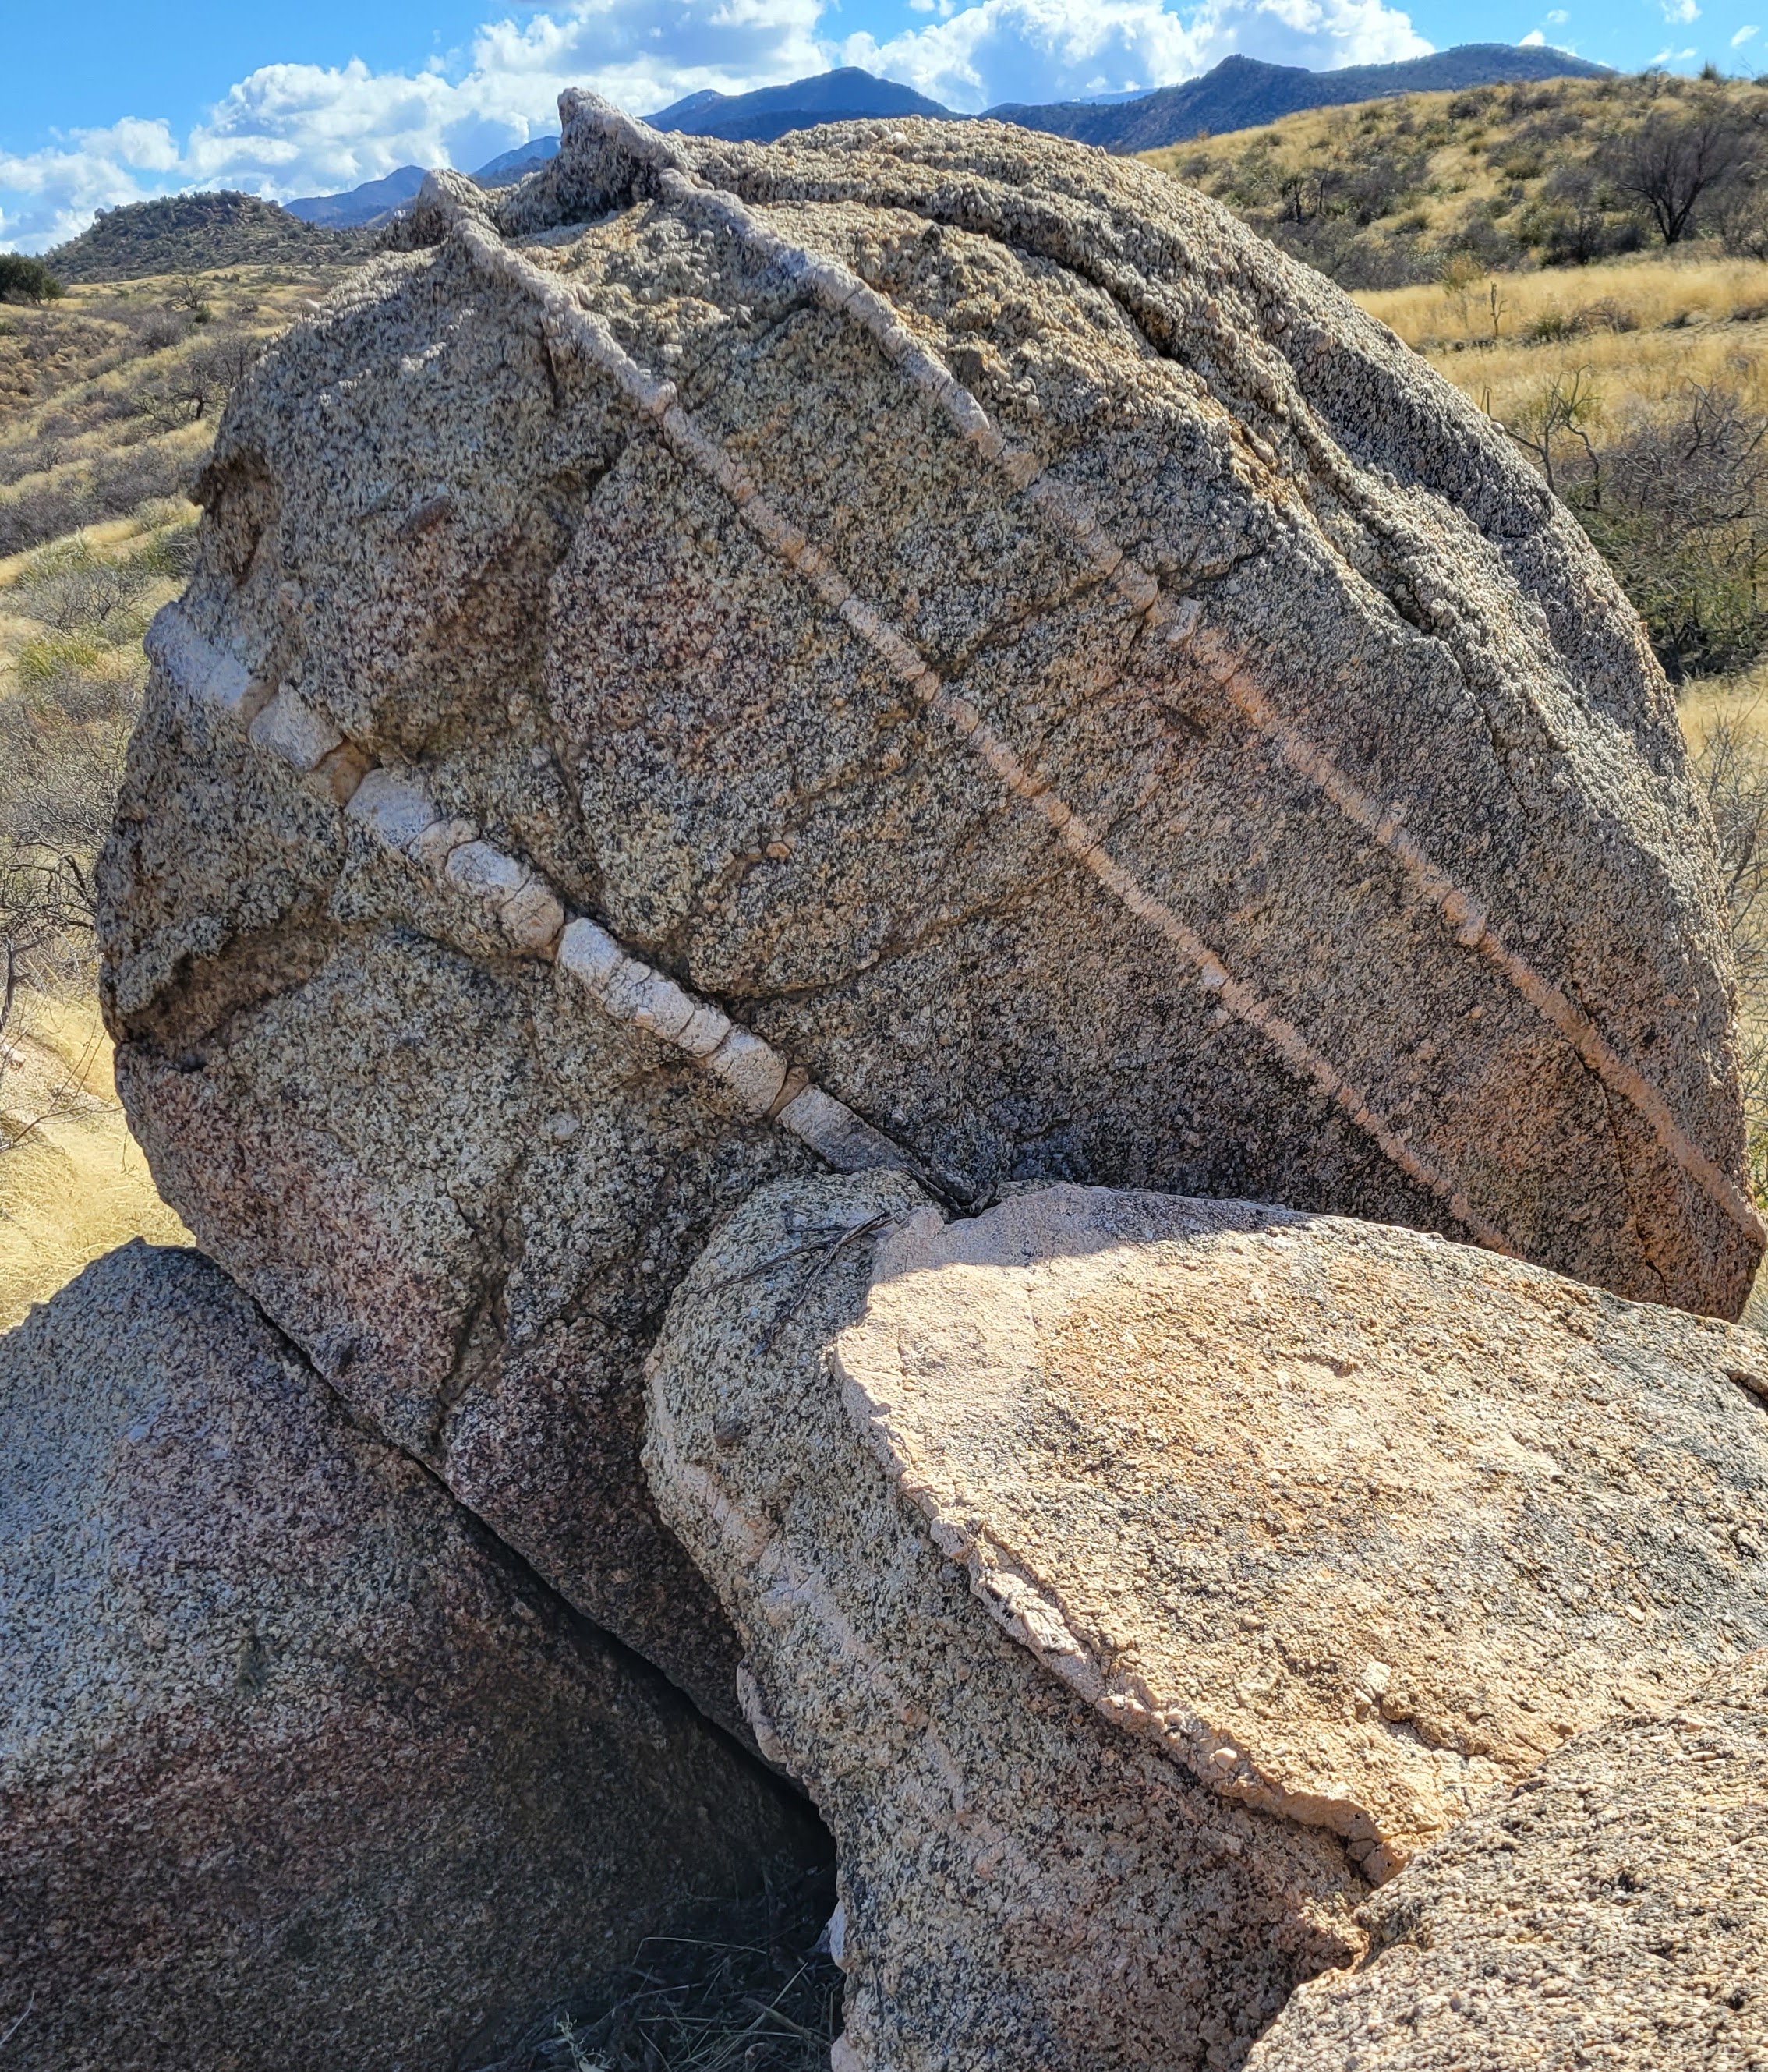 An example of unique merged rock formations at Oracle State Park